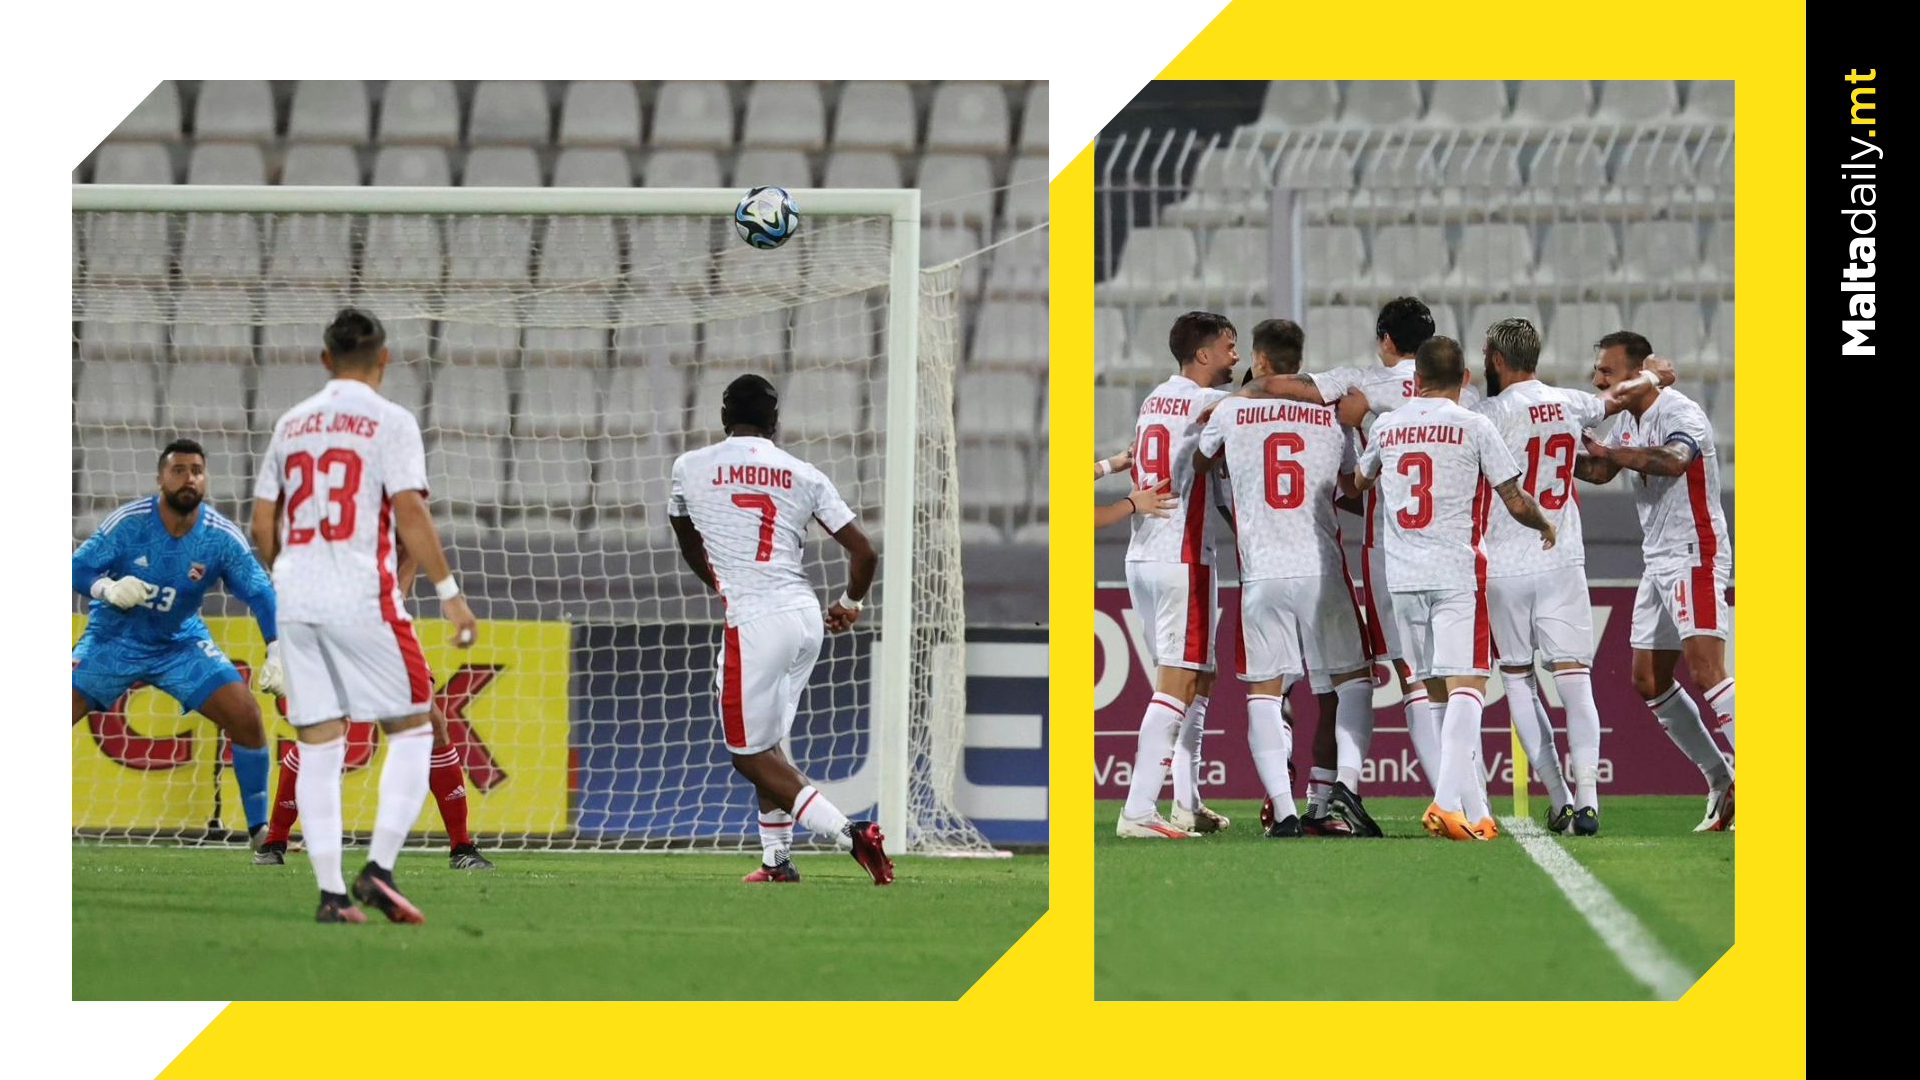 Mbong Goal Pushes Malta Over Gibraltar In Pre-Euro 2024 Friendly